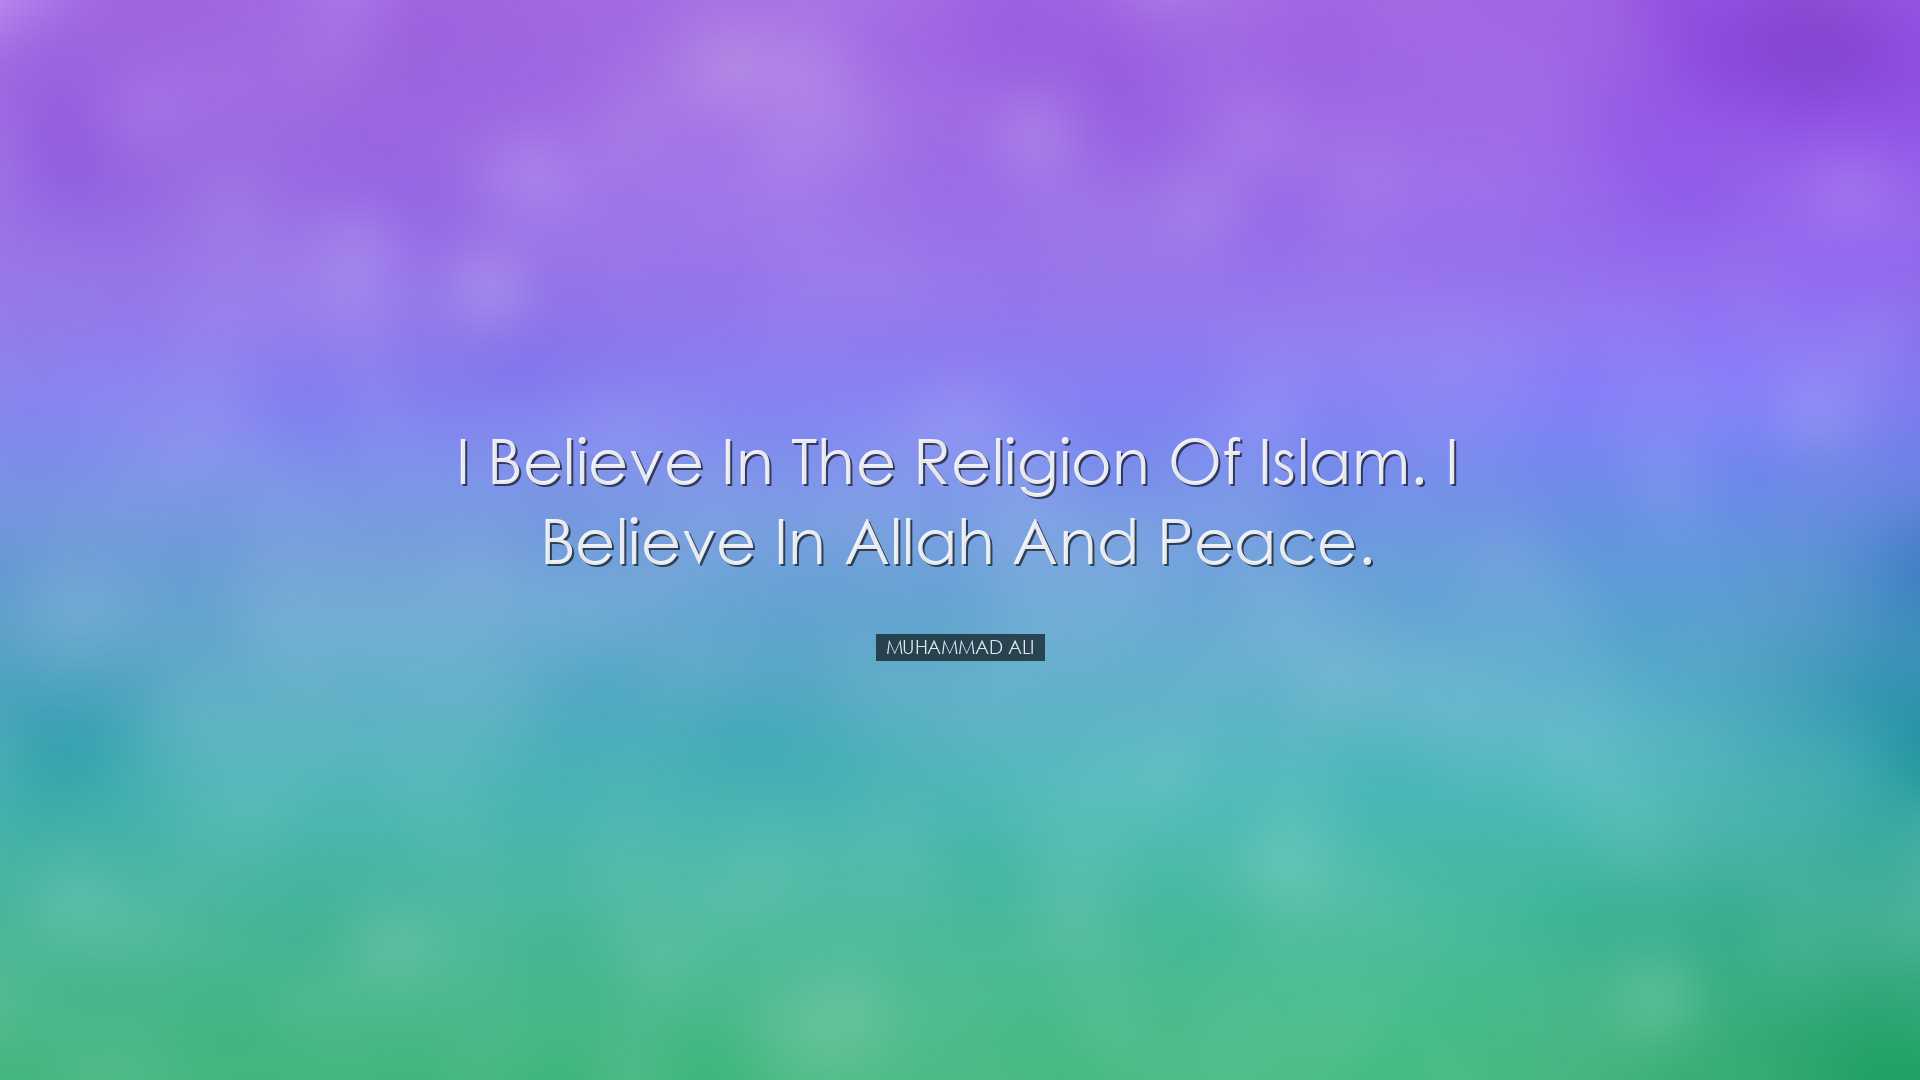 I believe in the religion of Islam. I believe in Allah and peace.